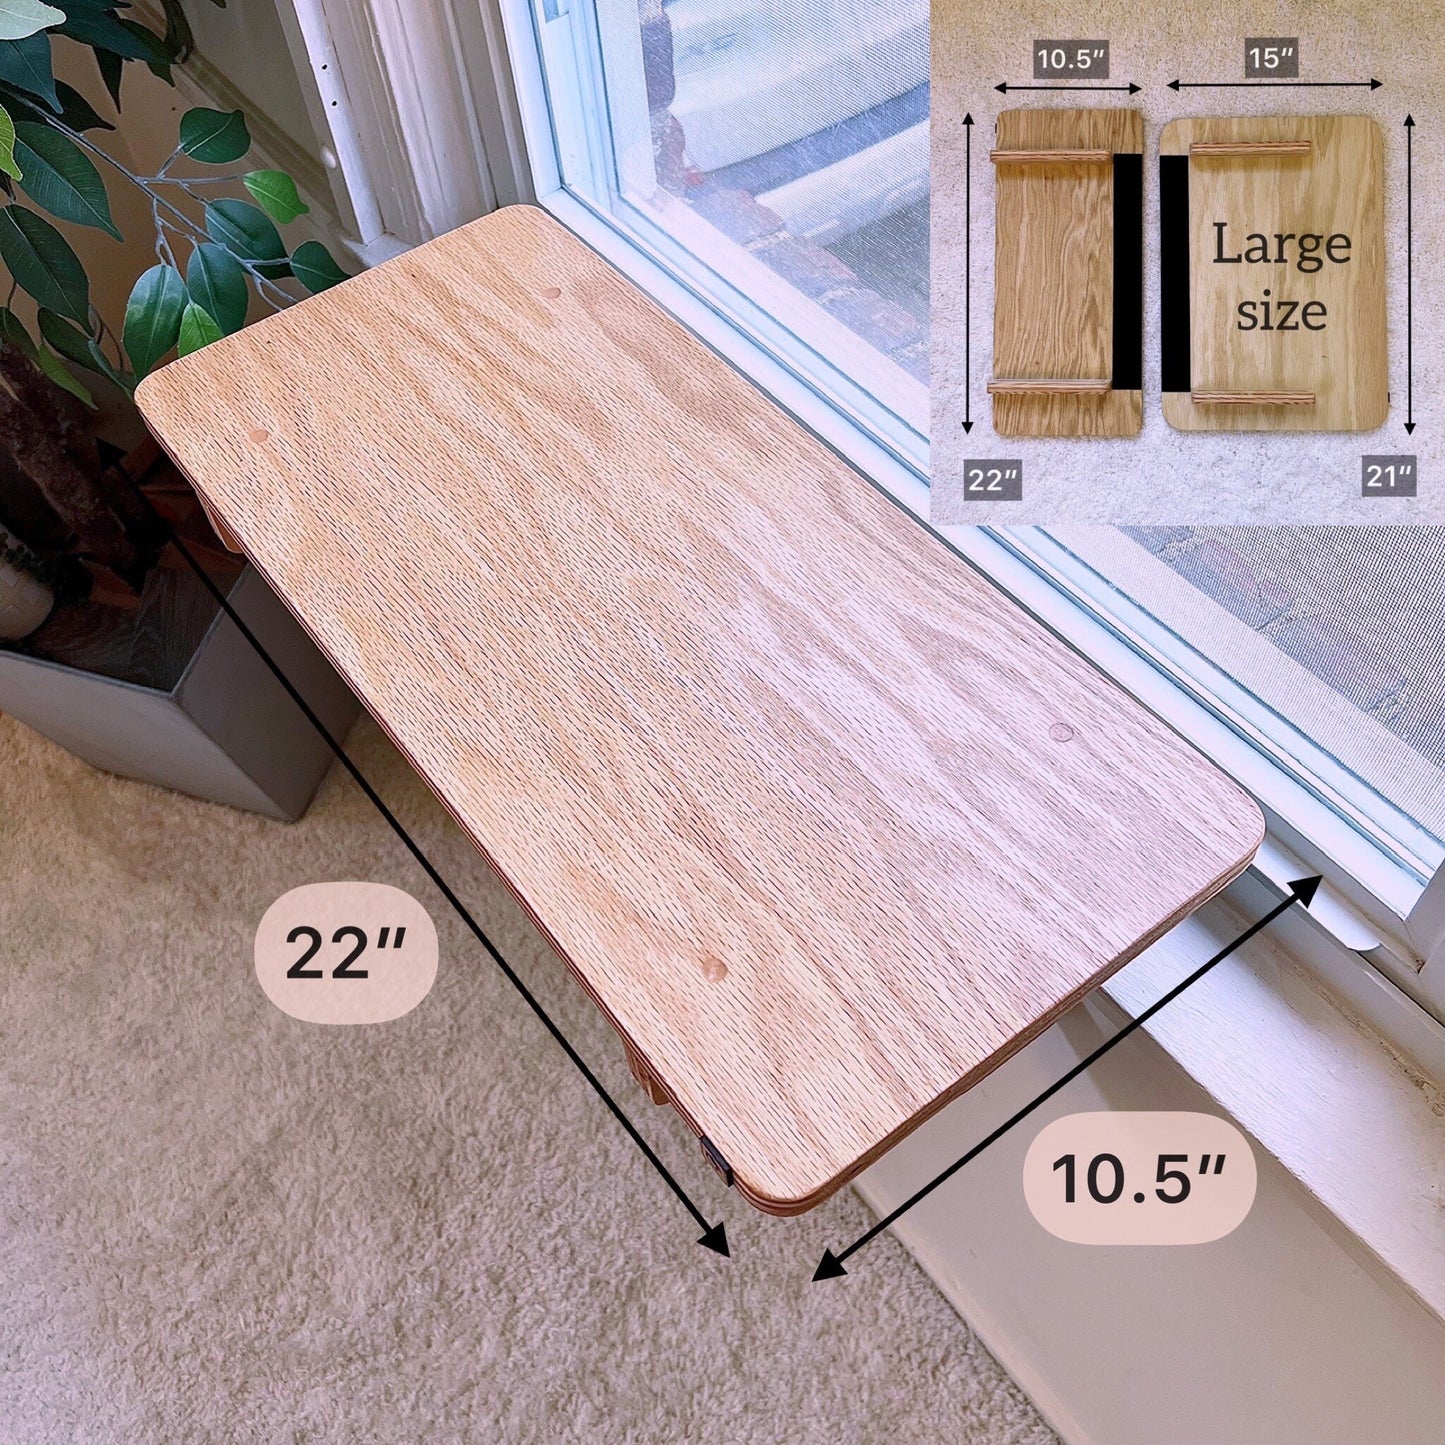 Oak Window Shelf_ Sturdy-Safe support legs _ Installed-removed 1 minute _ No tools No nails _ Plant - Flower Hanging Shelf_22"x10"_21"x15"